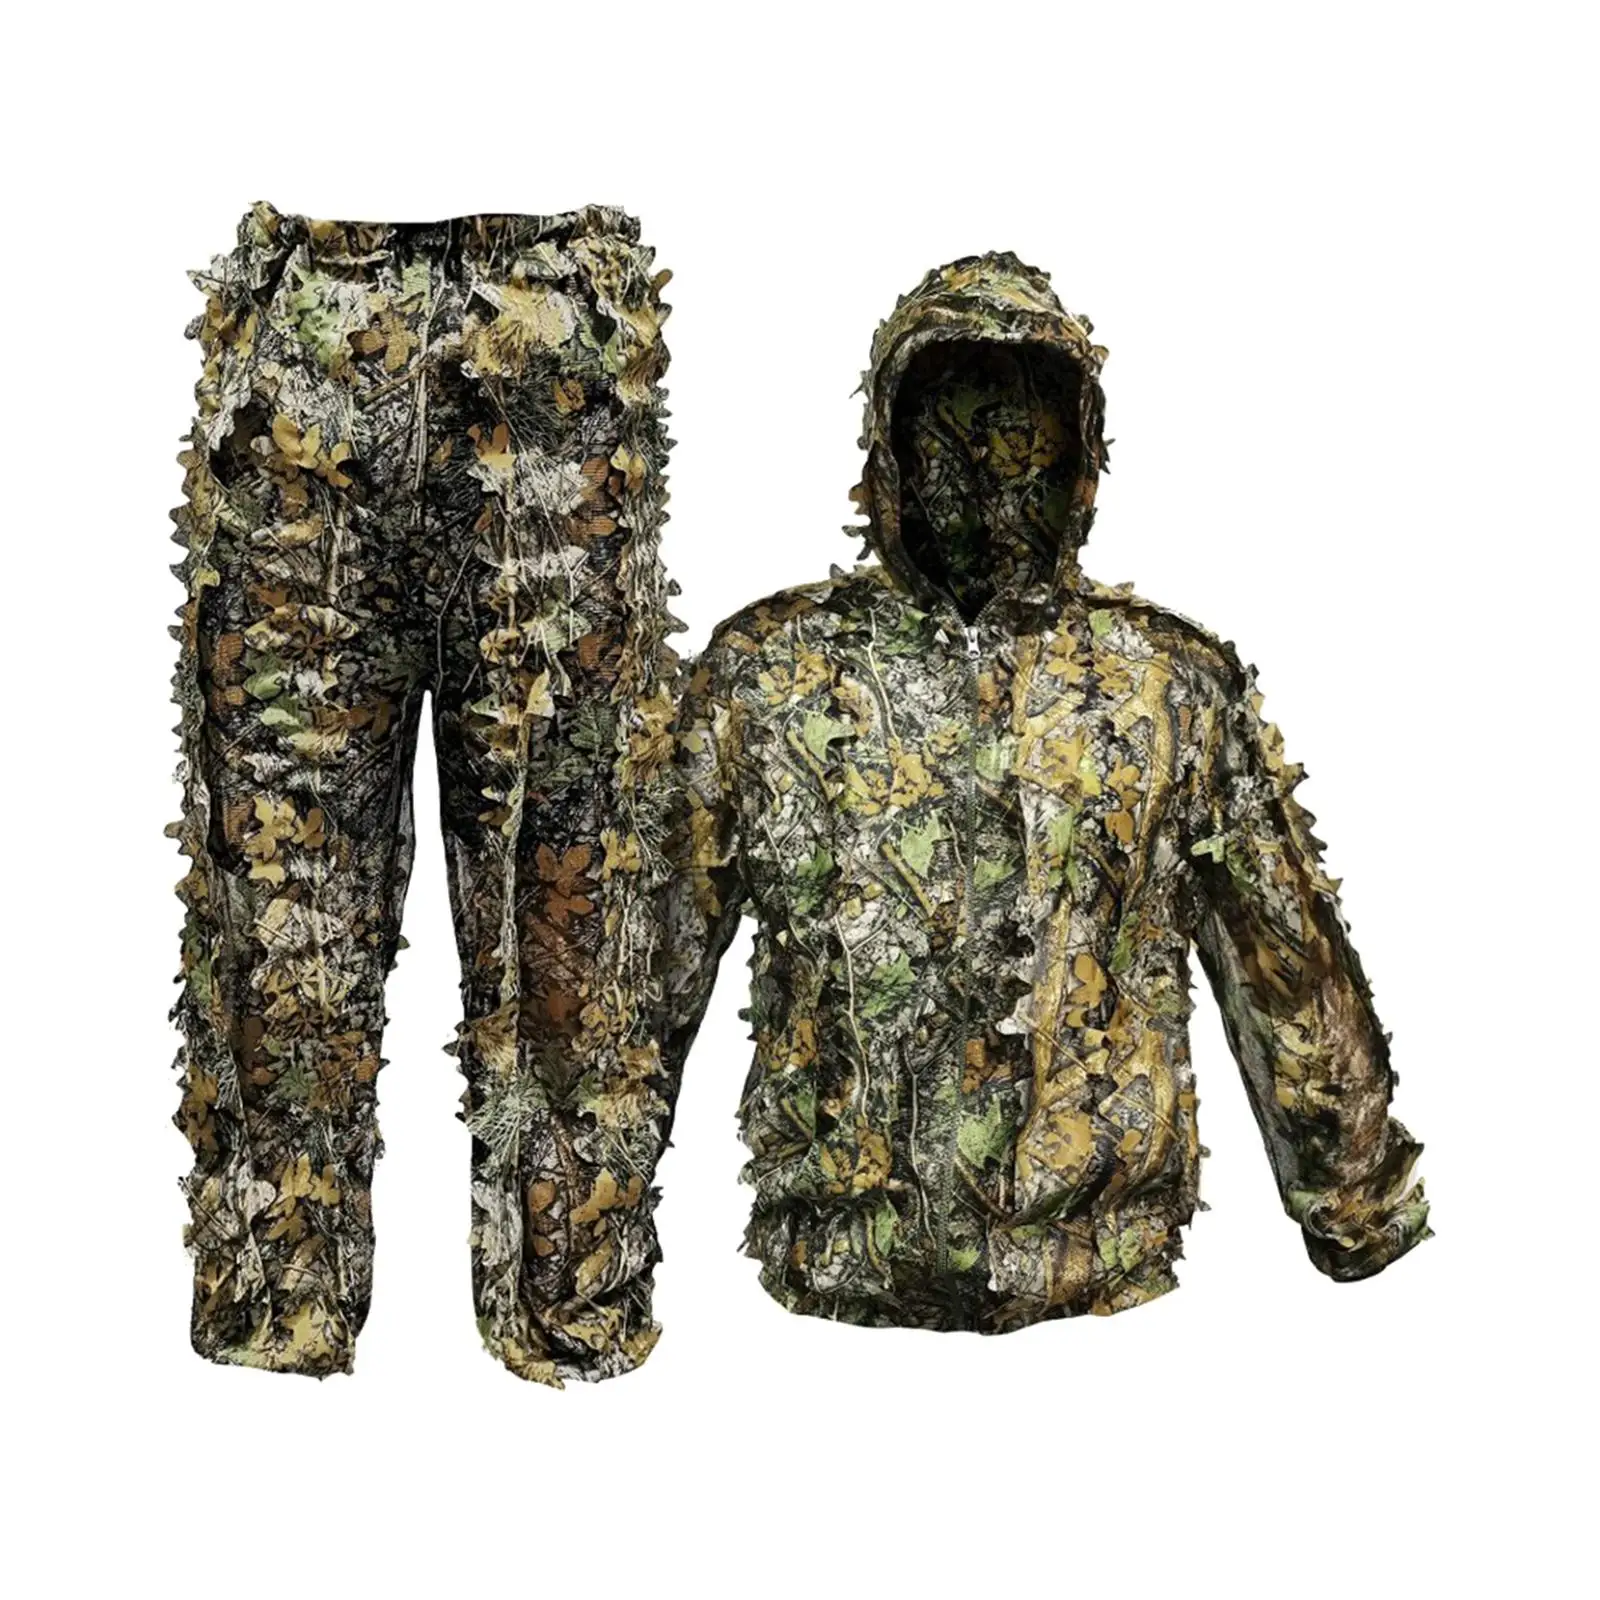 Ghillie Suit Hunting Woodland Hooded Jacket Pant Camo Leafy Zippers Unisex